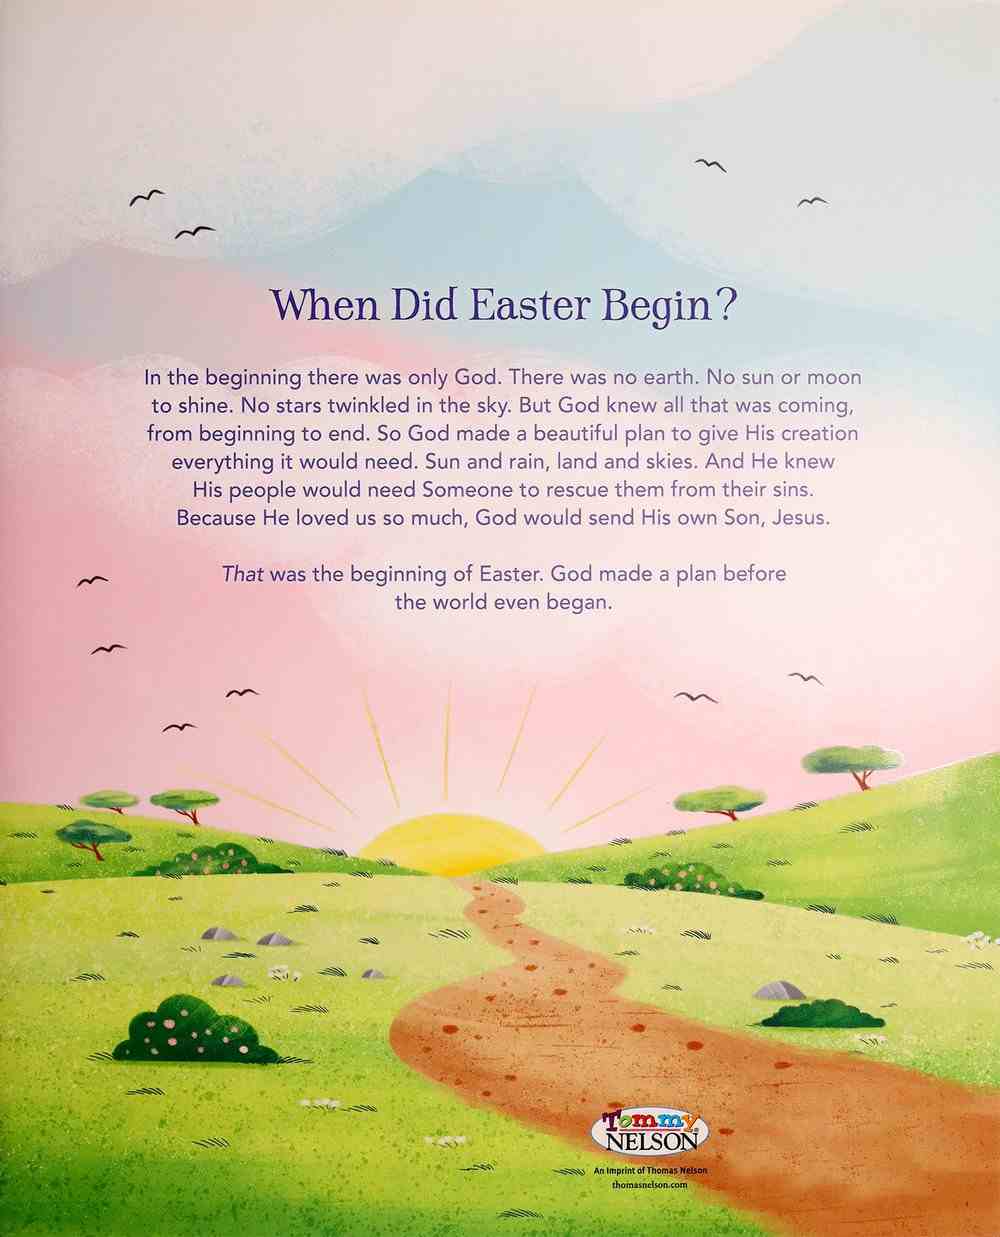 Jesus Calling: The Story of Easter (Picture Book) Hardback